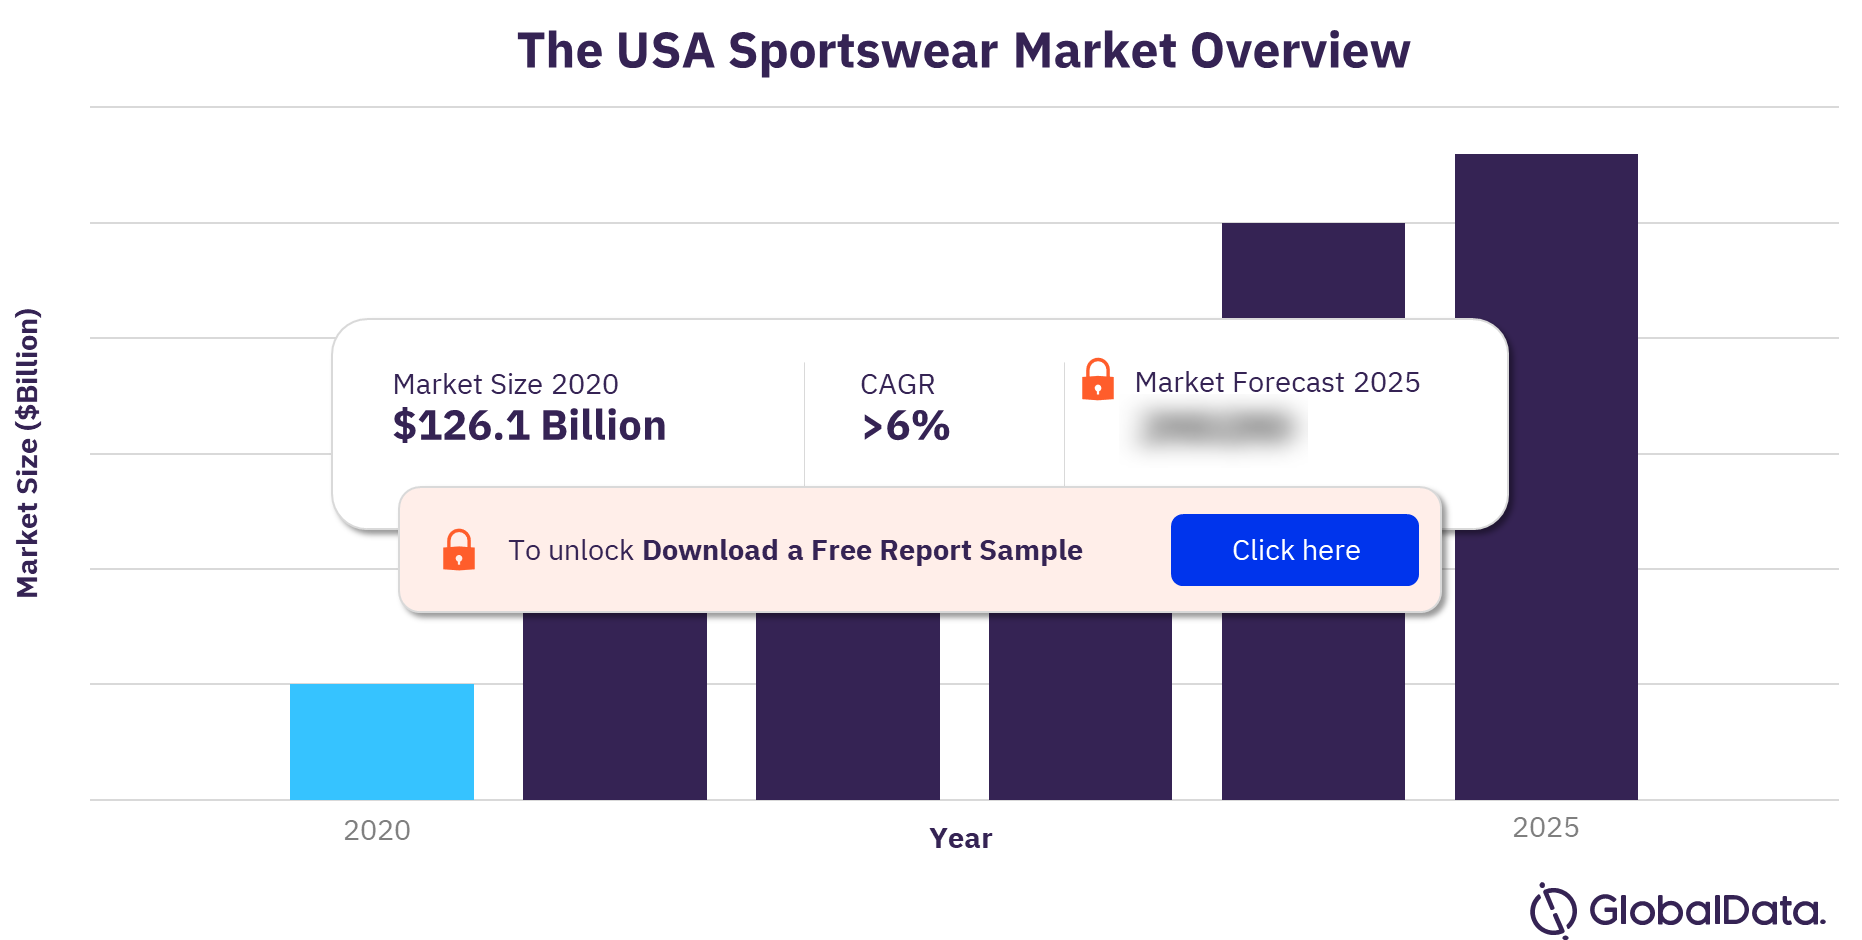 Offline Purchases to Dominate the USA Sportswear Market by